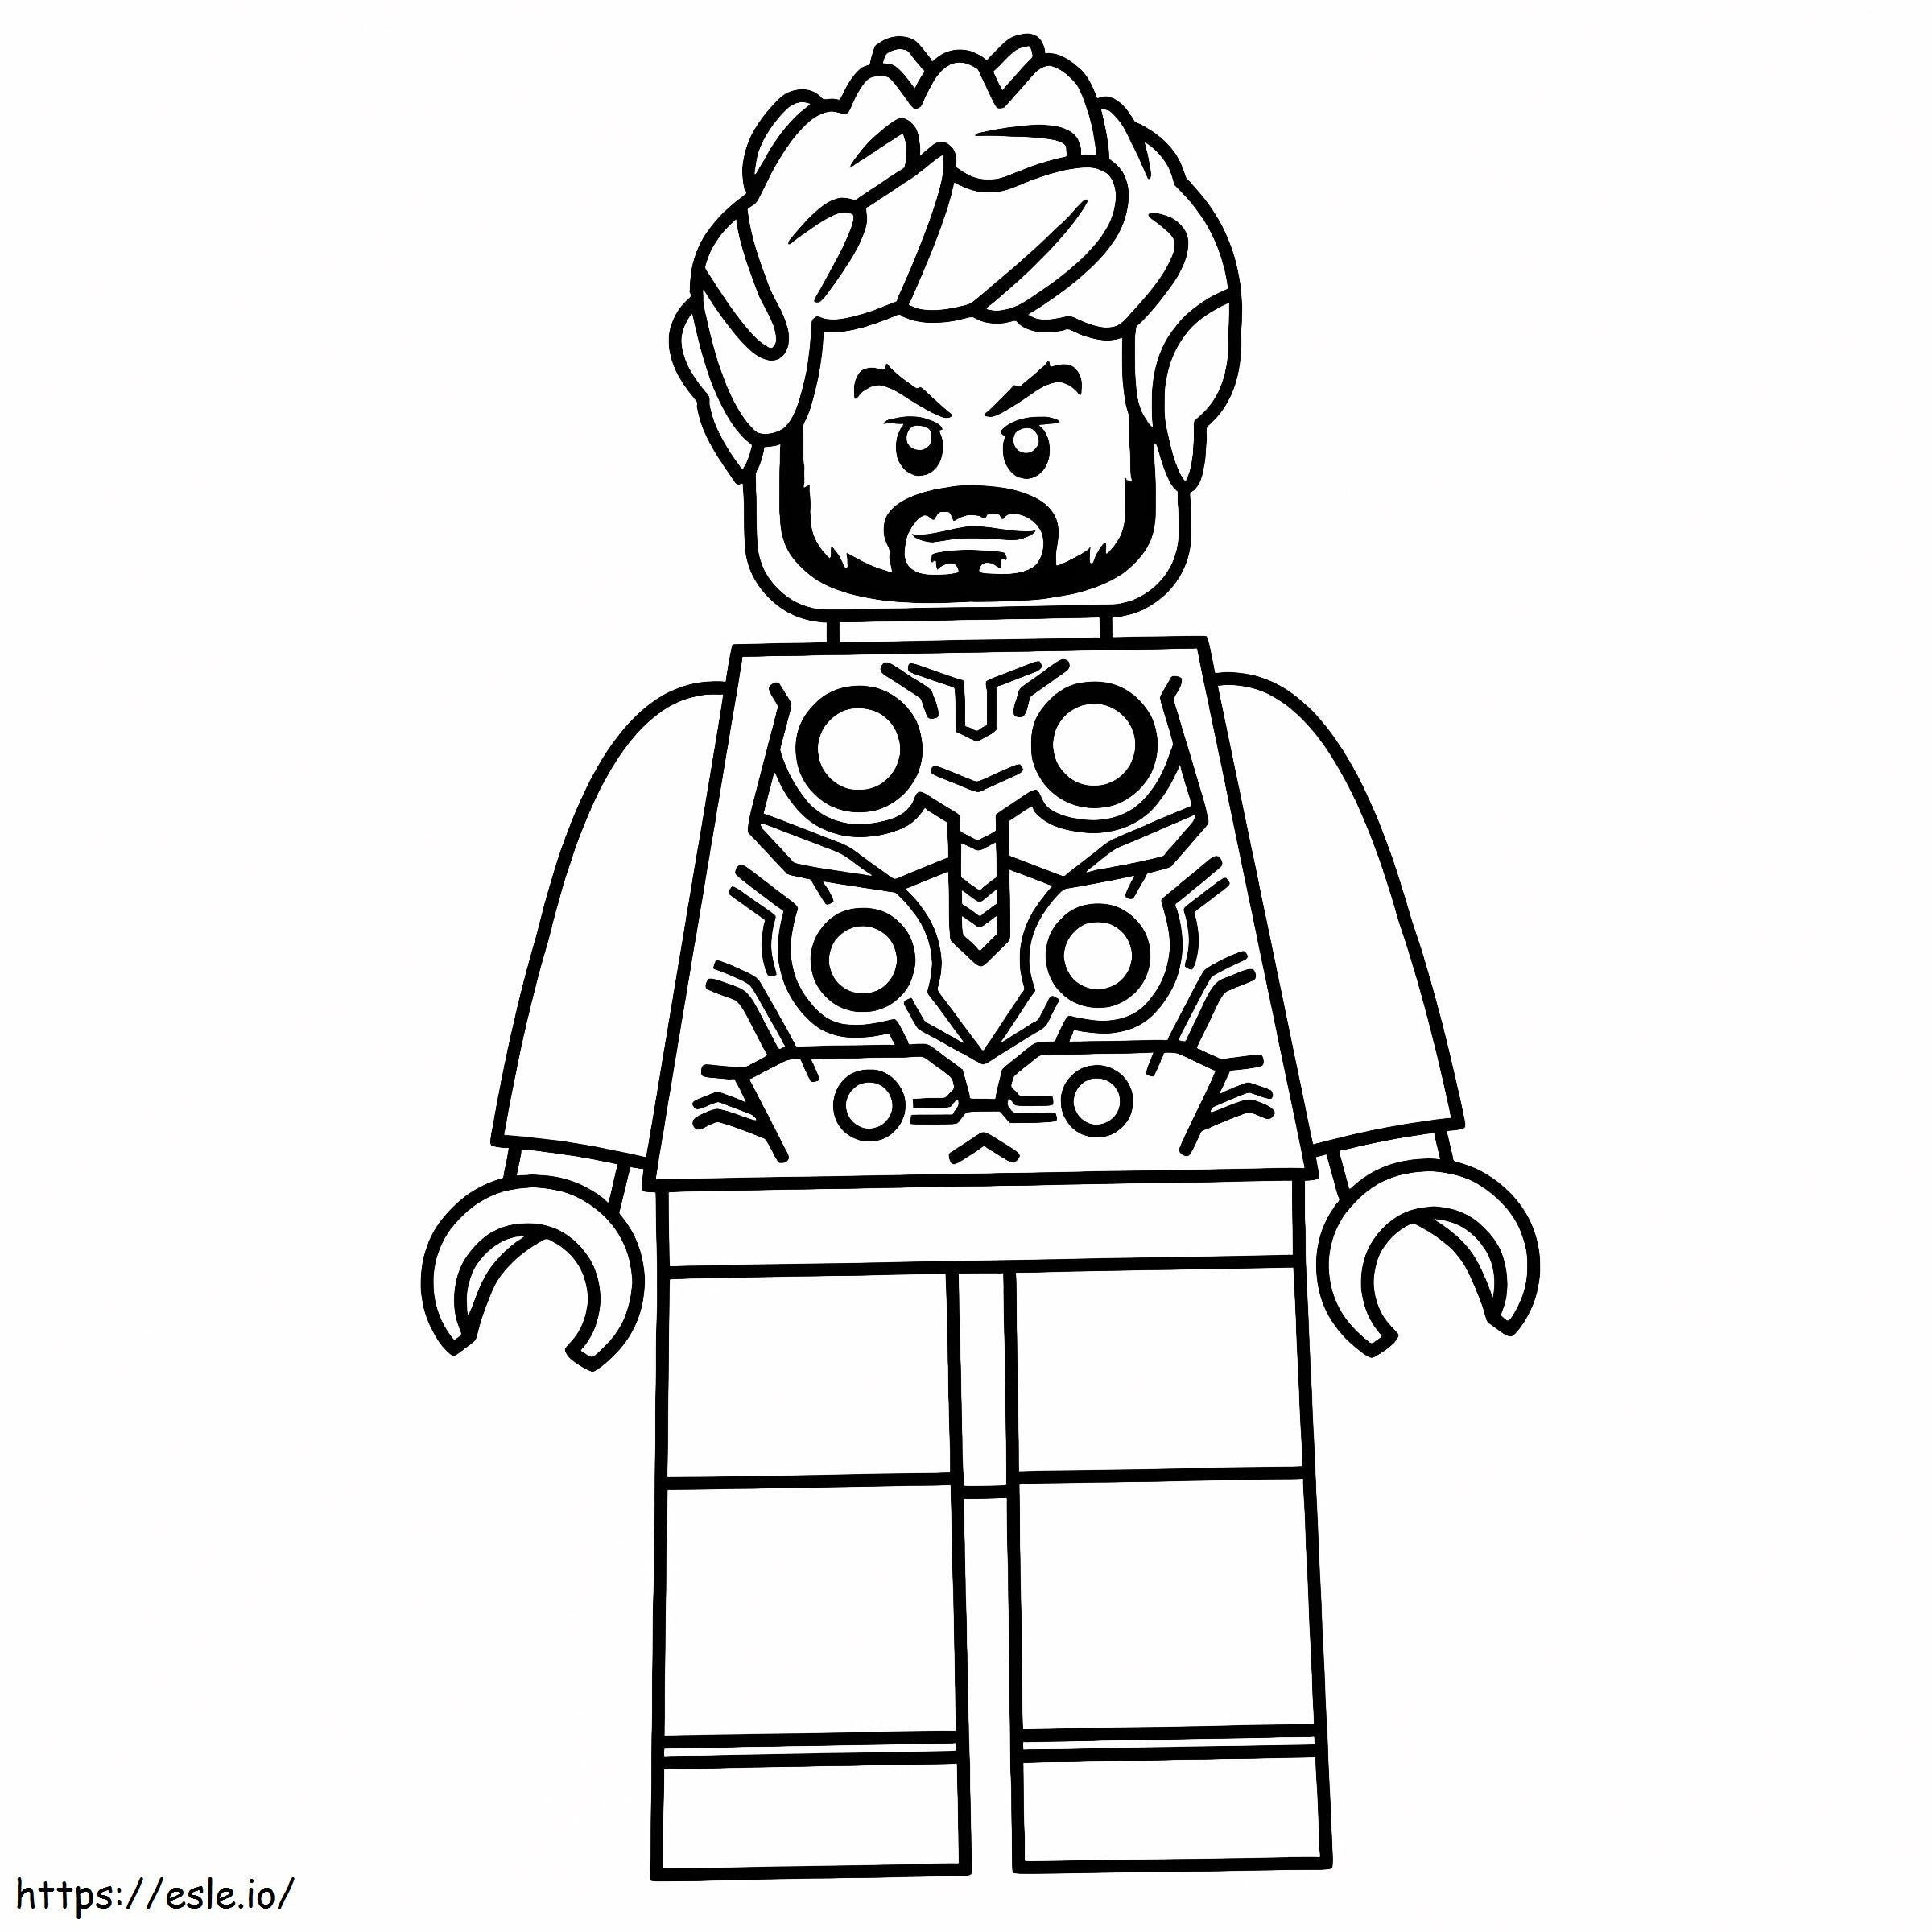 1541552924 251 Letsdrawkids How To Draw Thor Line coloring page